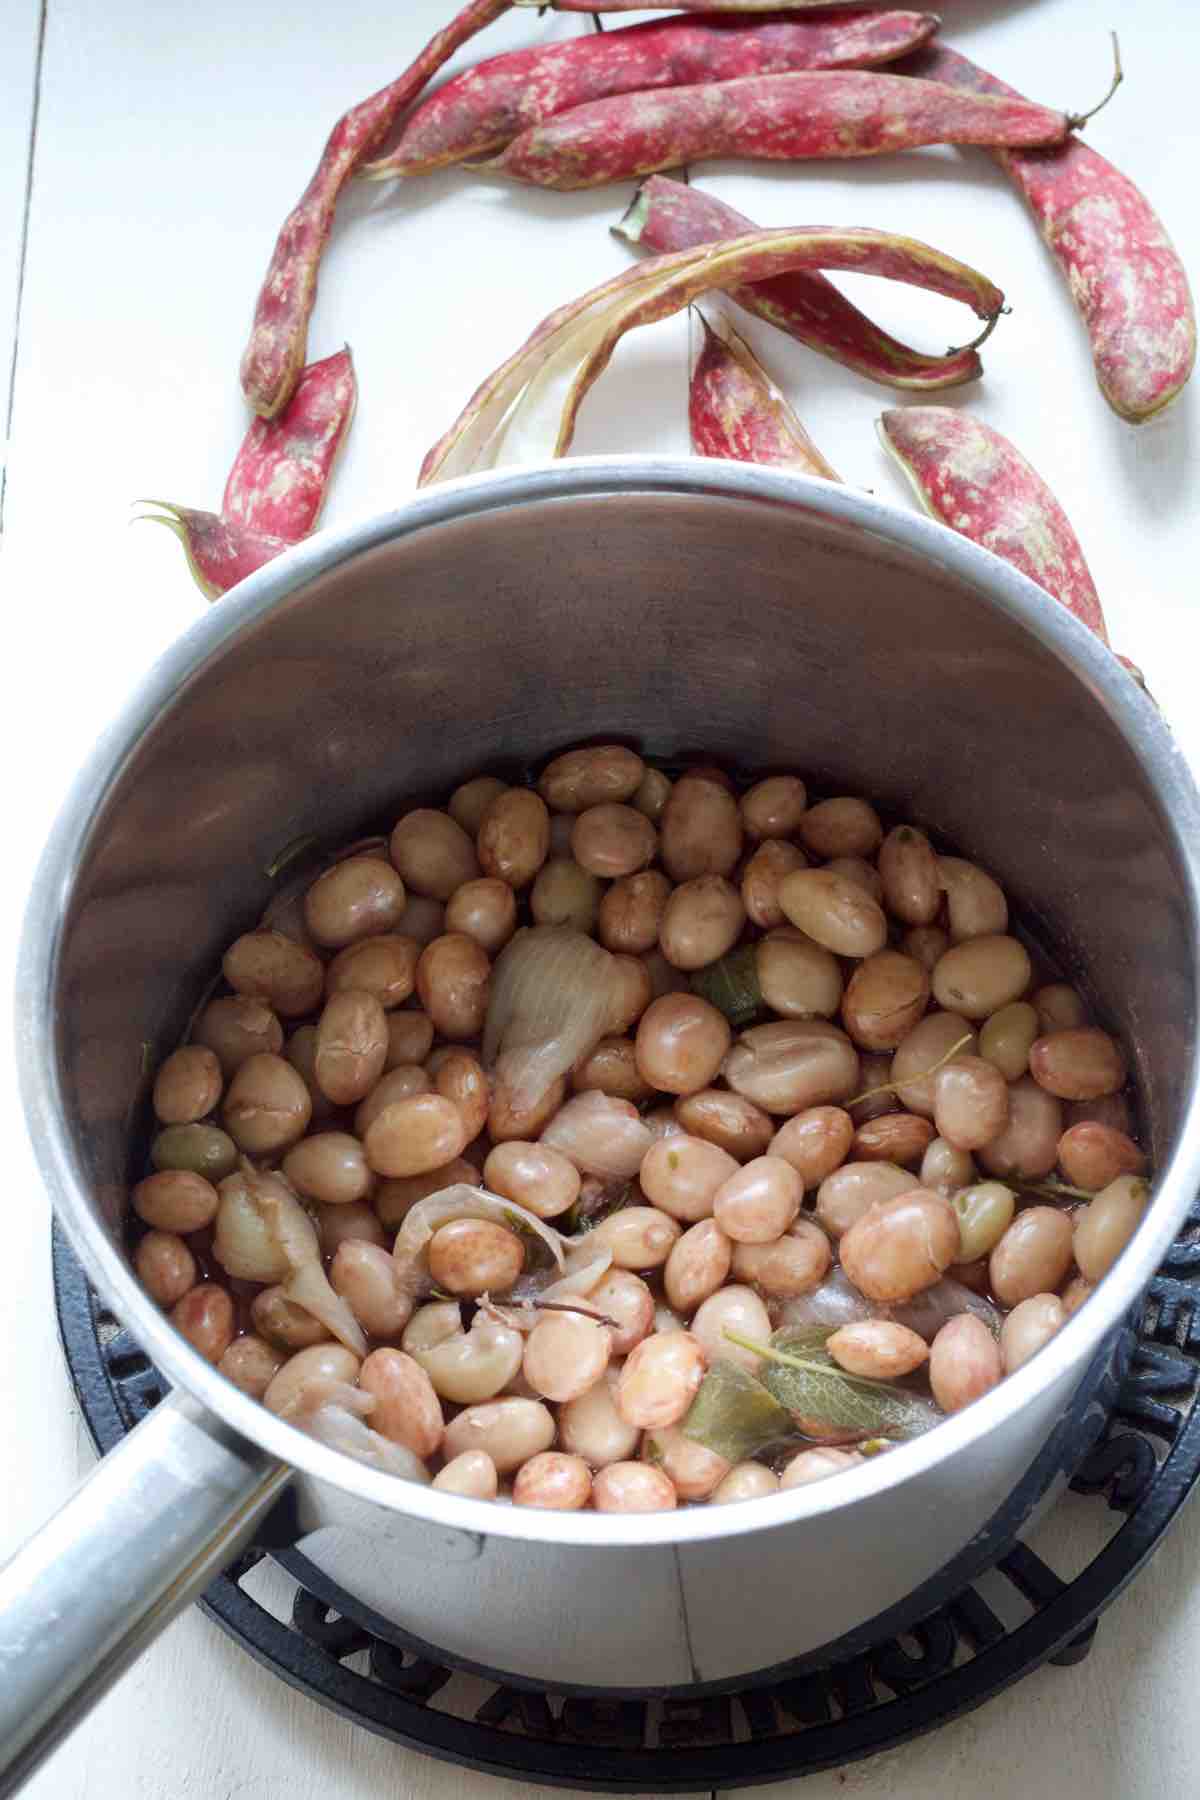 Borlotti beans in a pan with aromatics after cooking has finished.